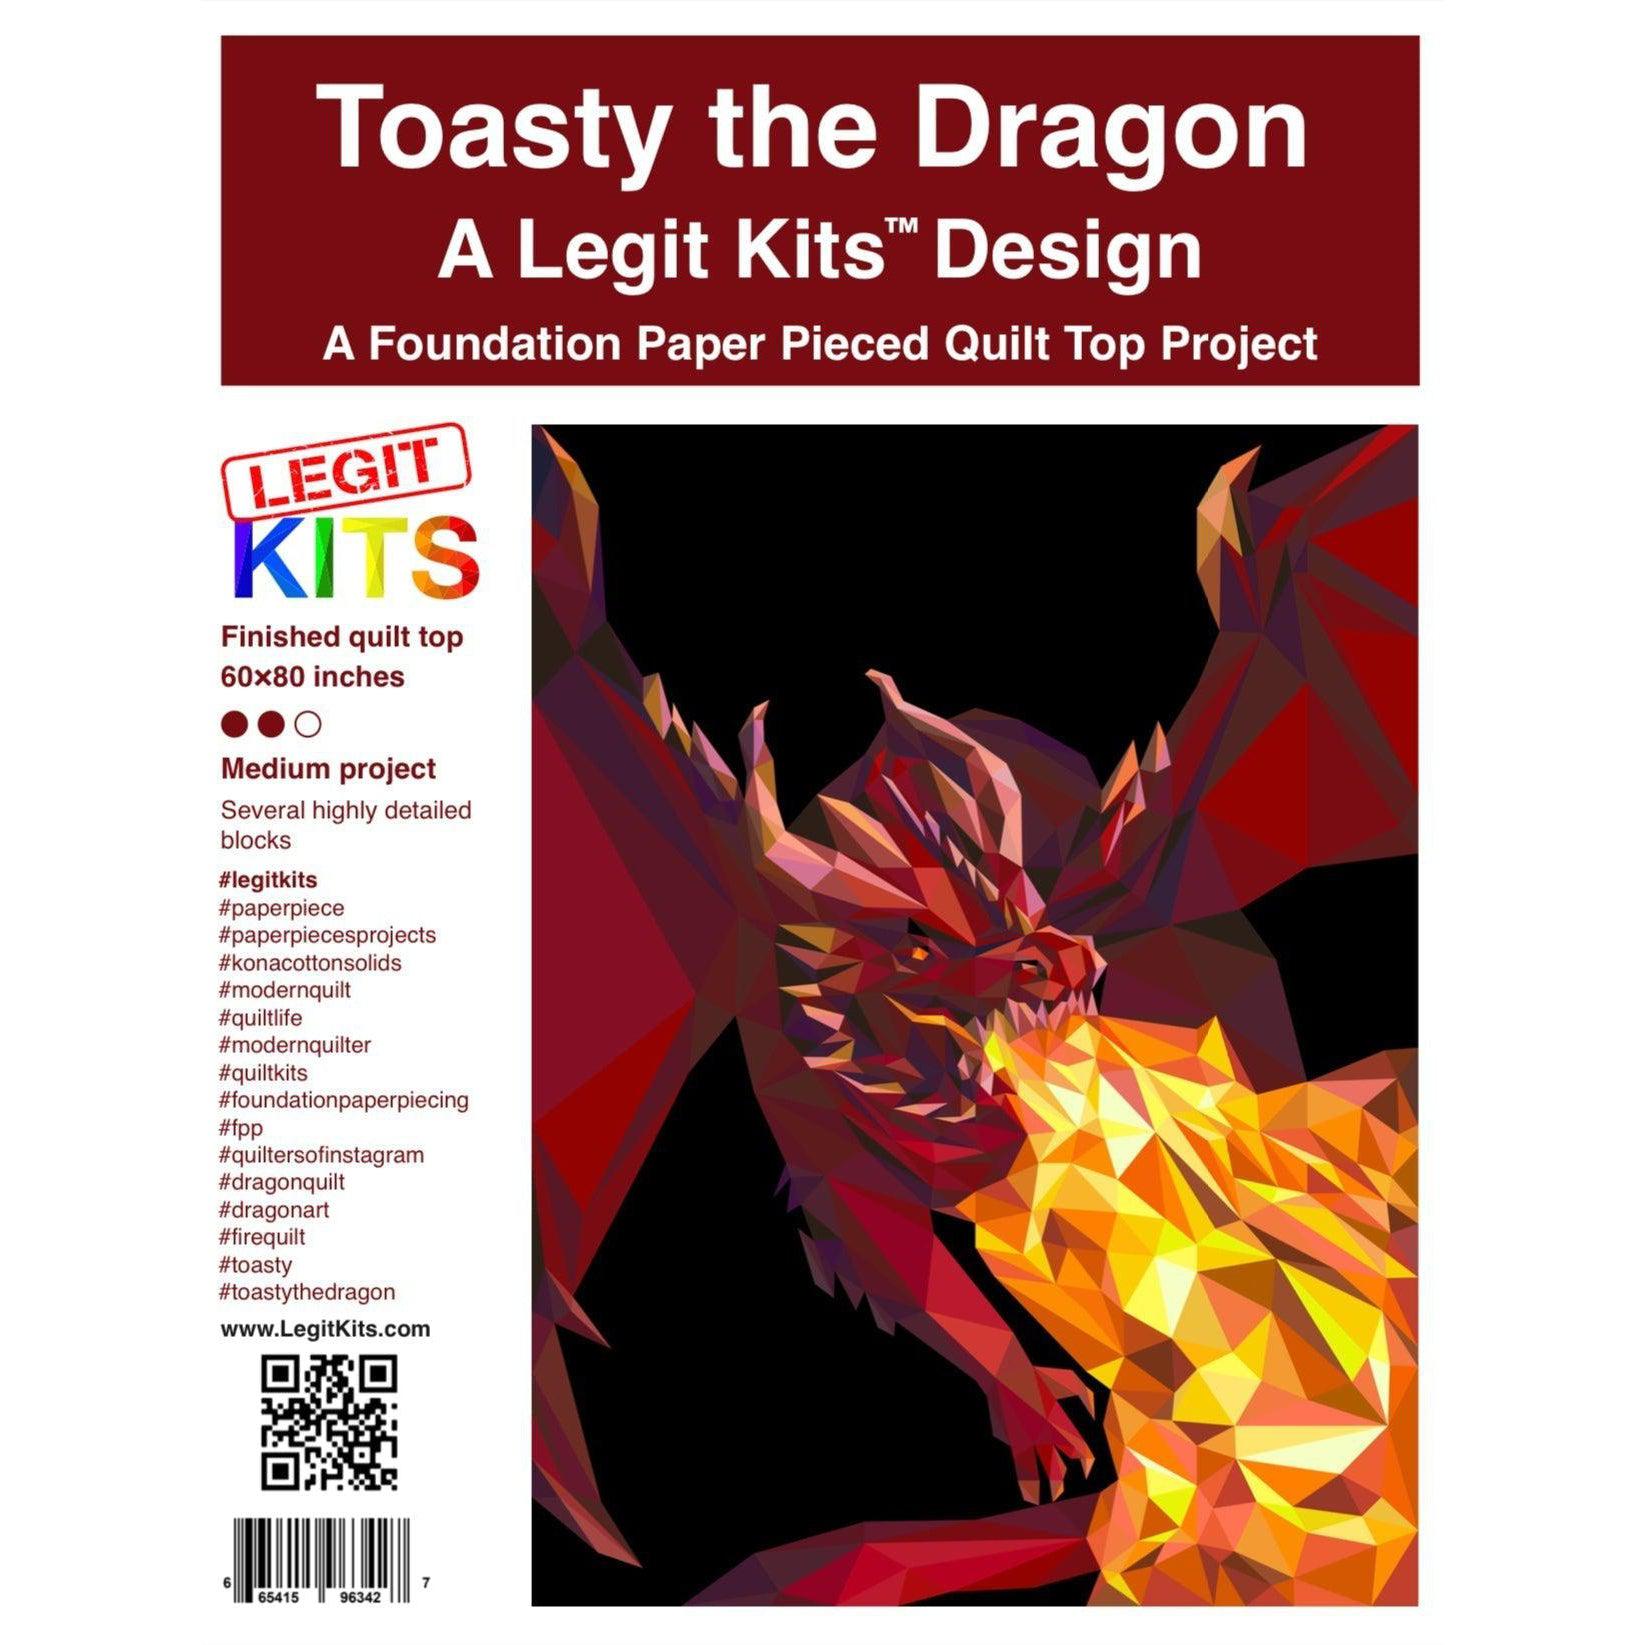 Toasty the Dragon Pattern-Legit Kits-My Favorite Quilt Store